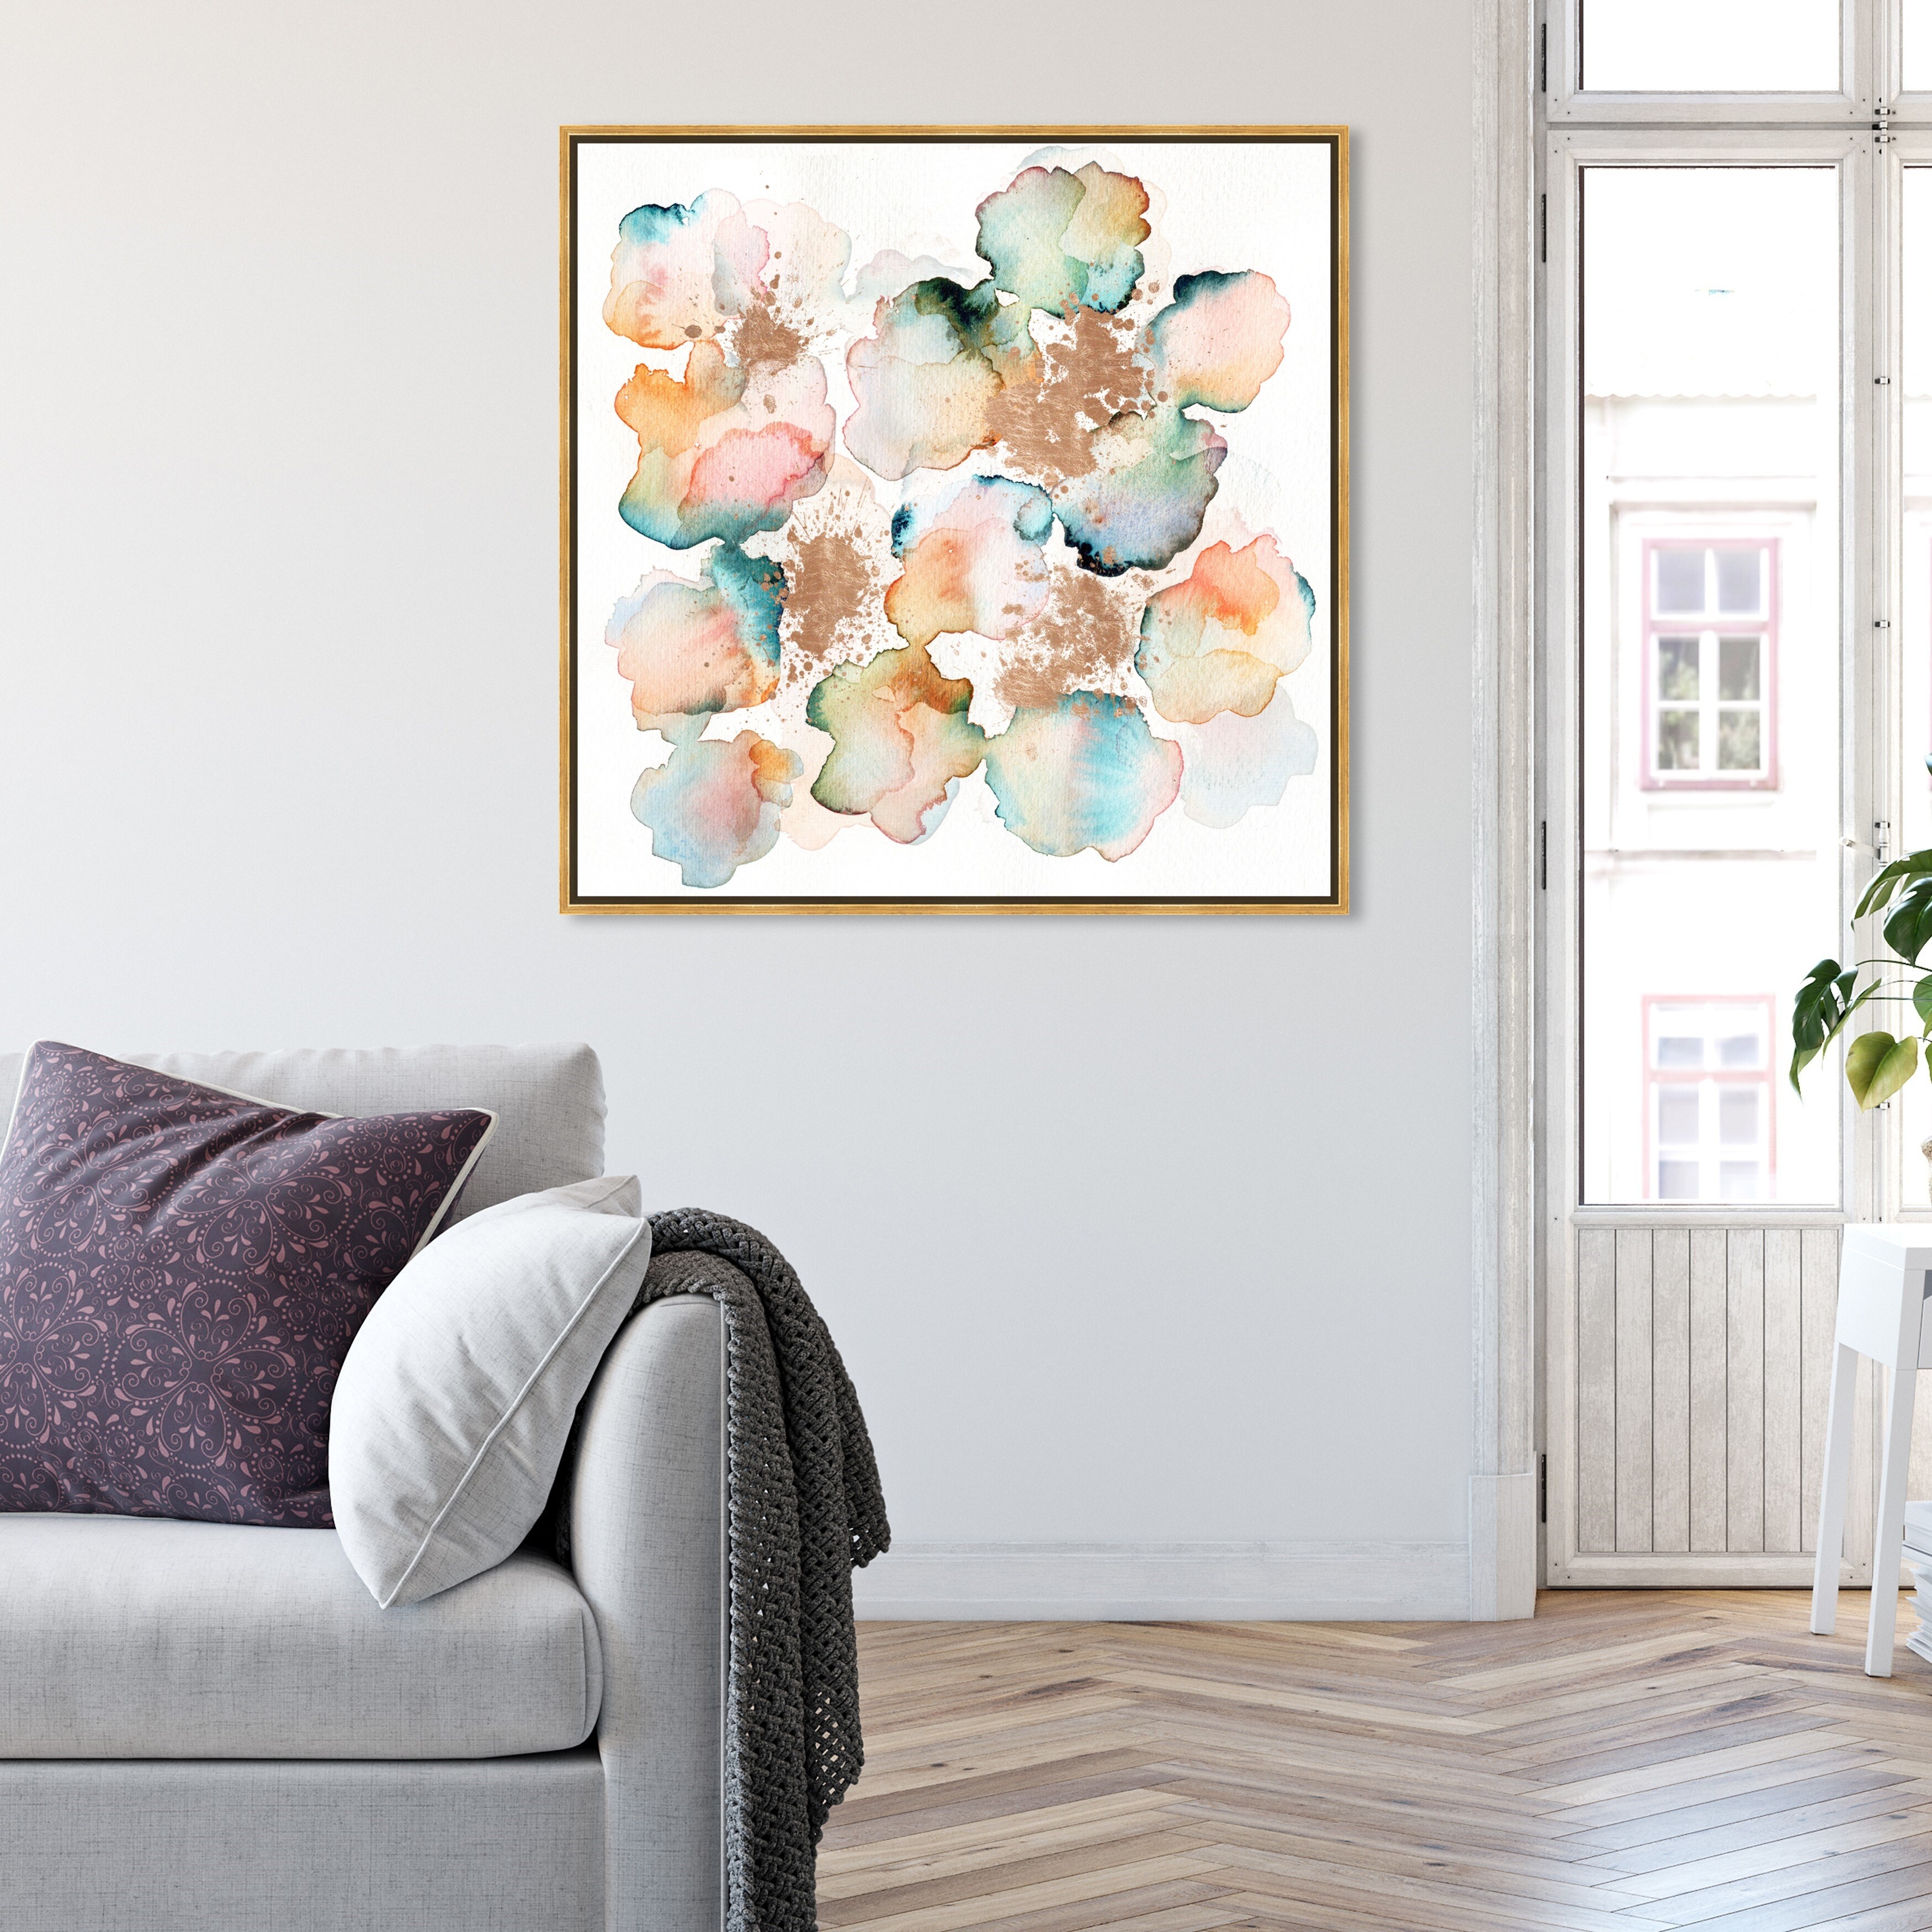 Oliver Gal 'Rose Gold Garden' Abstract Wall Art Framed Canvas 